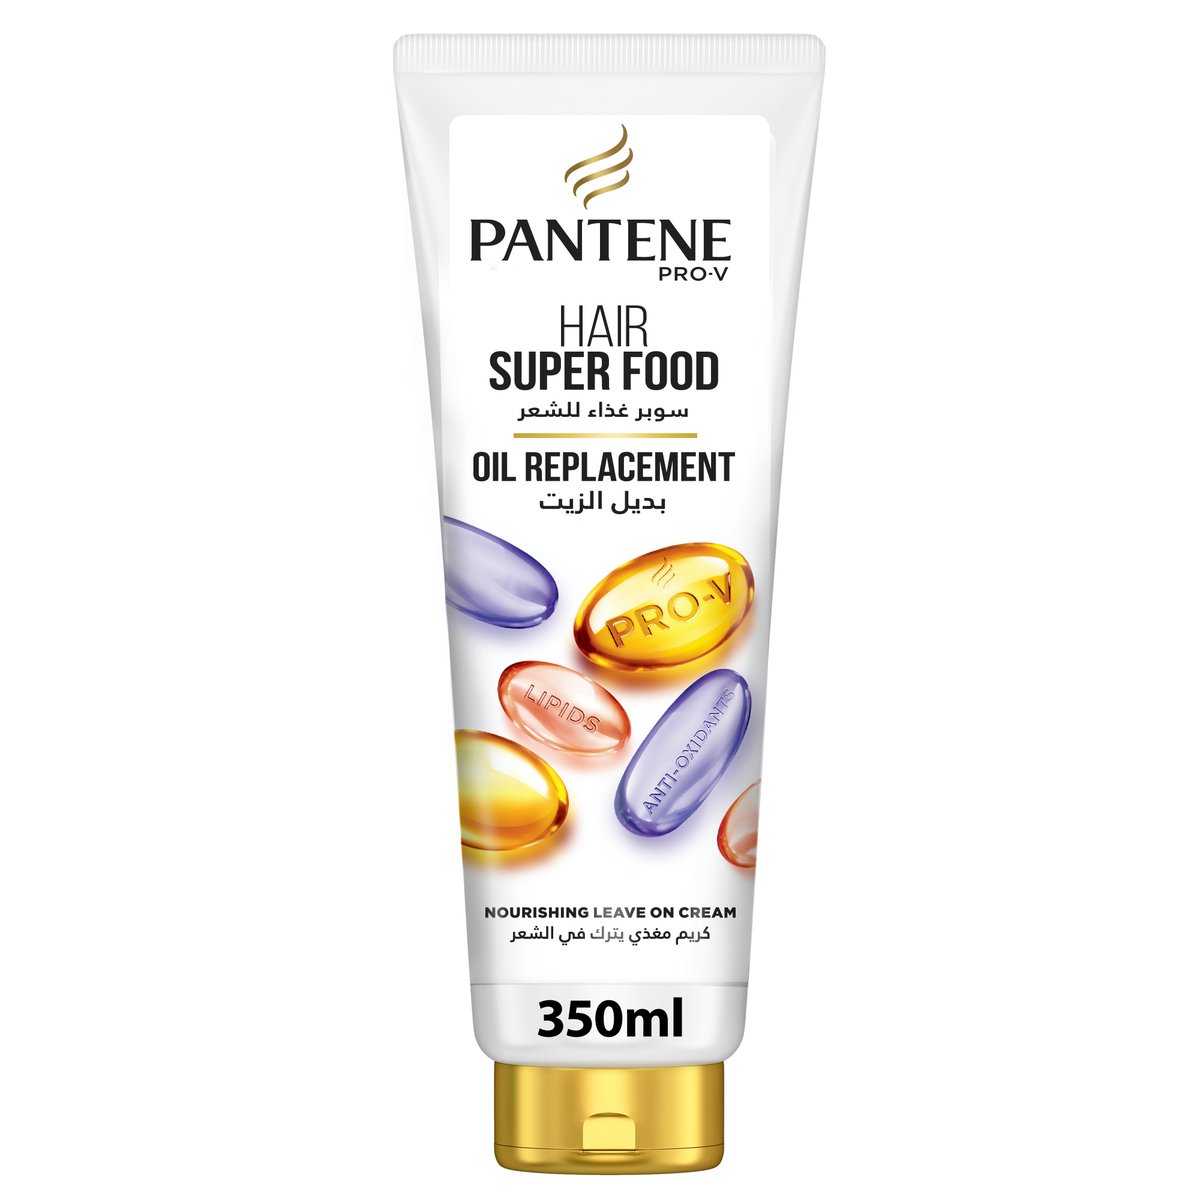 Pantene ProV Hair Super Food Oil Replacement Conditioner 350 ml